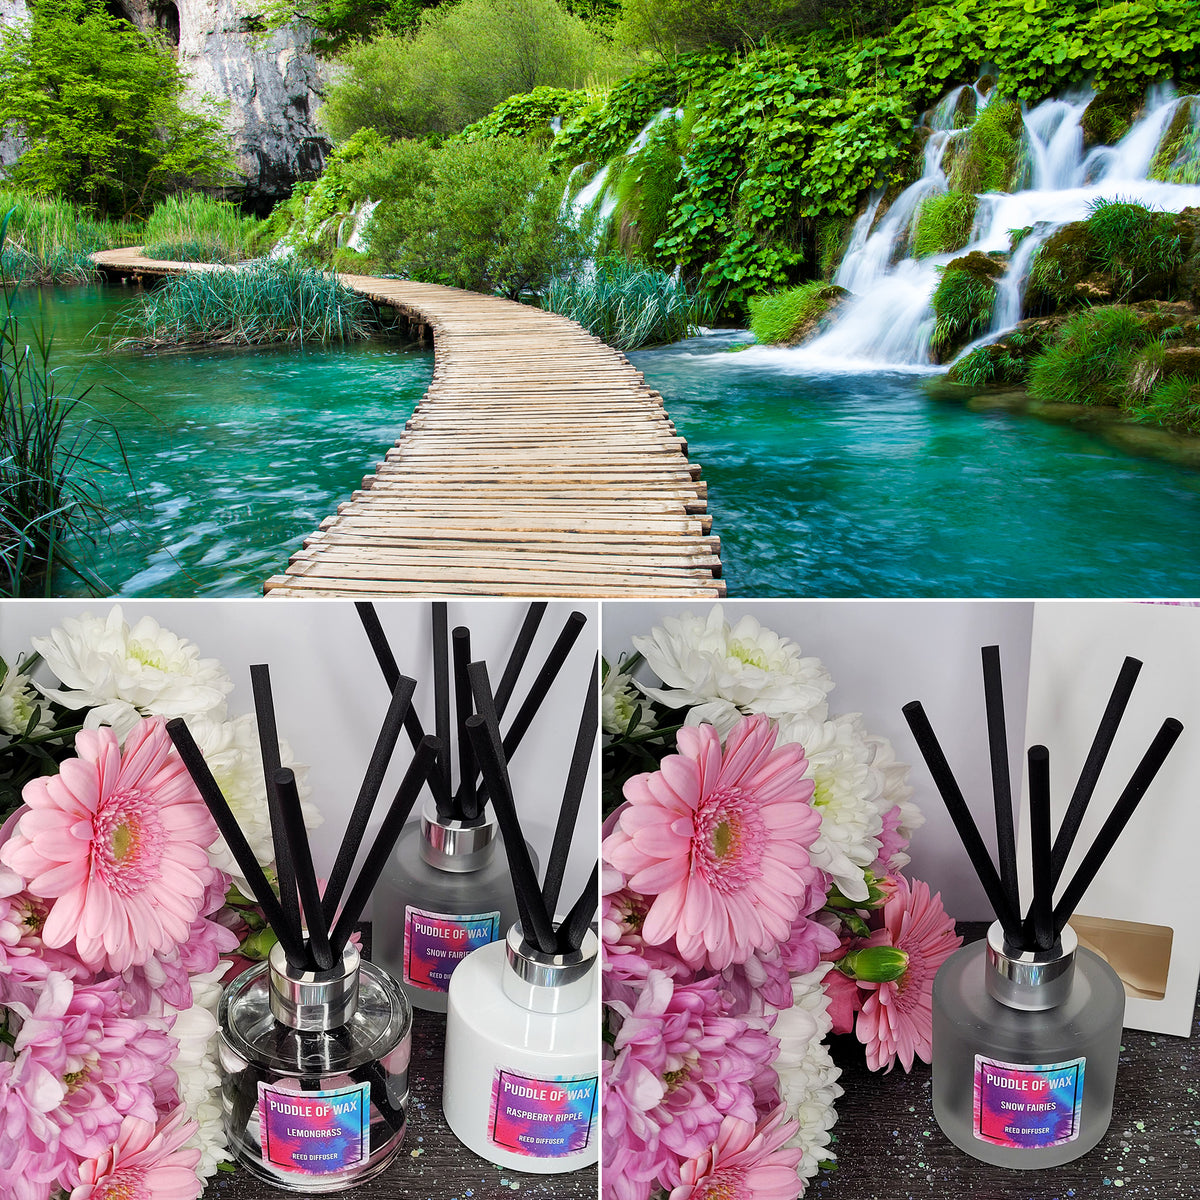 Coconut & Waterfall Blooms Reed Diffuser